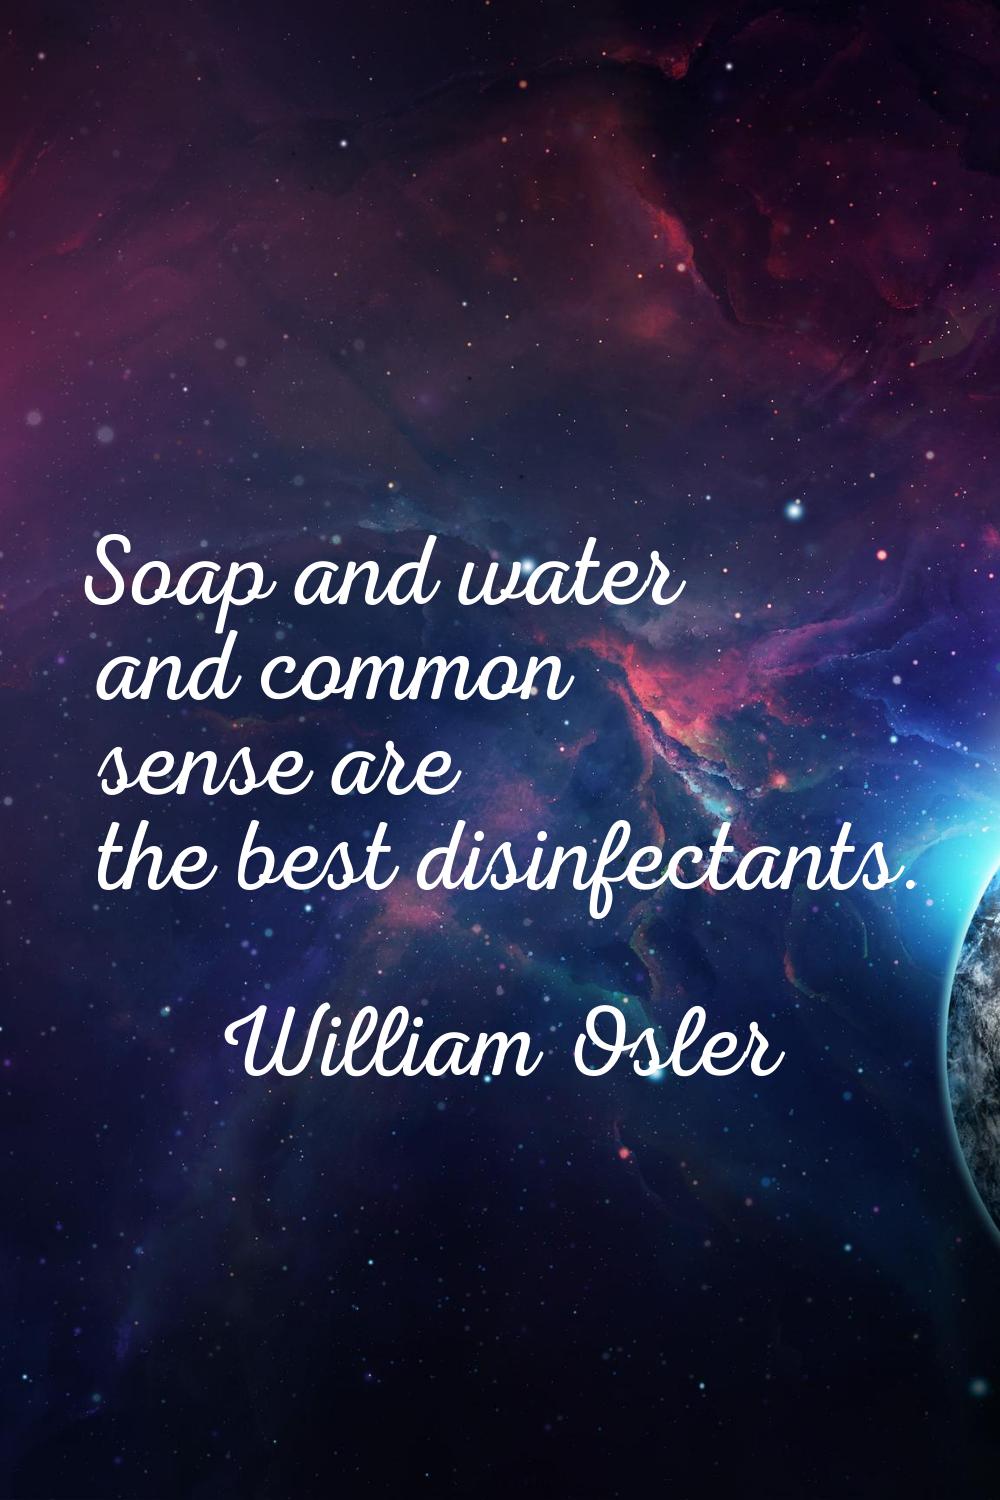 Soap and water and common sense are the best disinfectants.